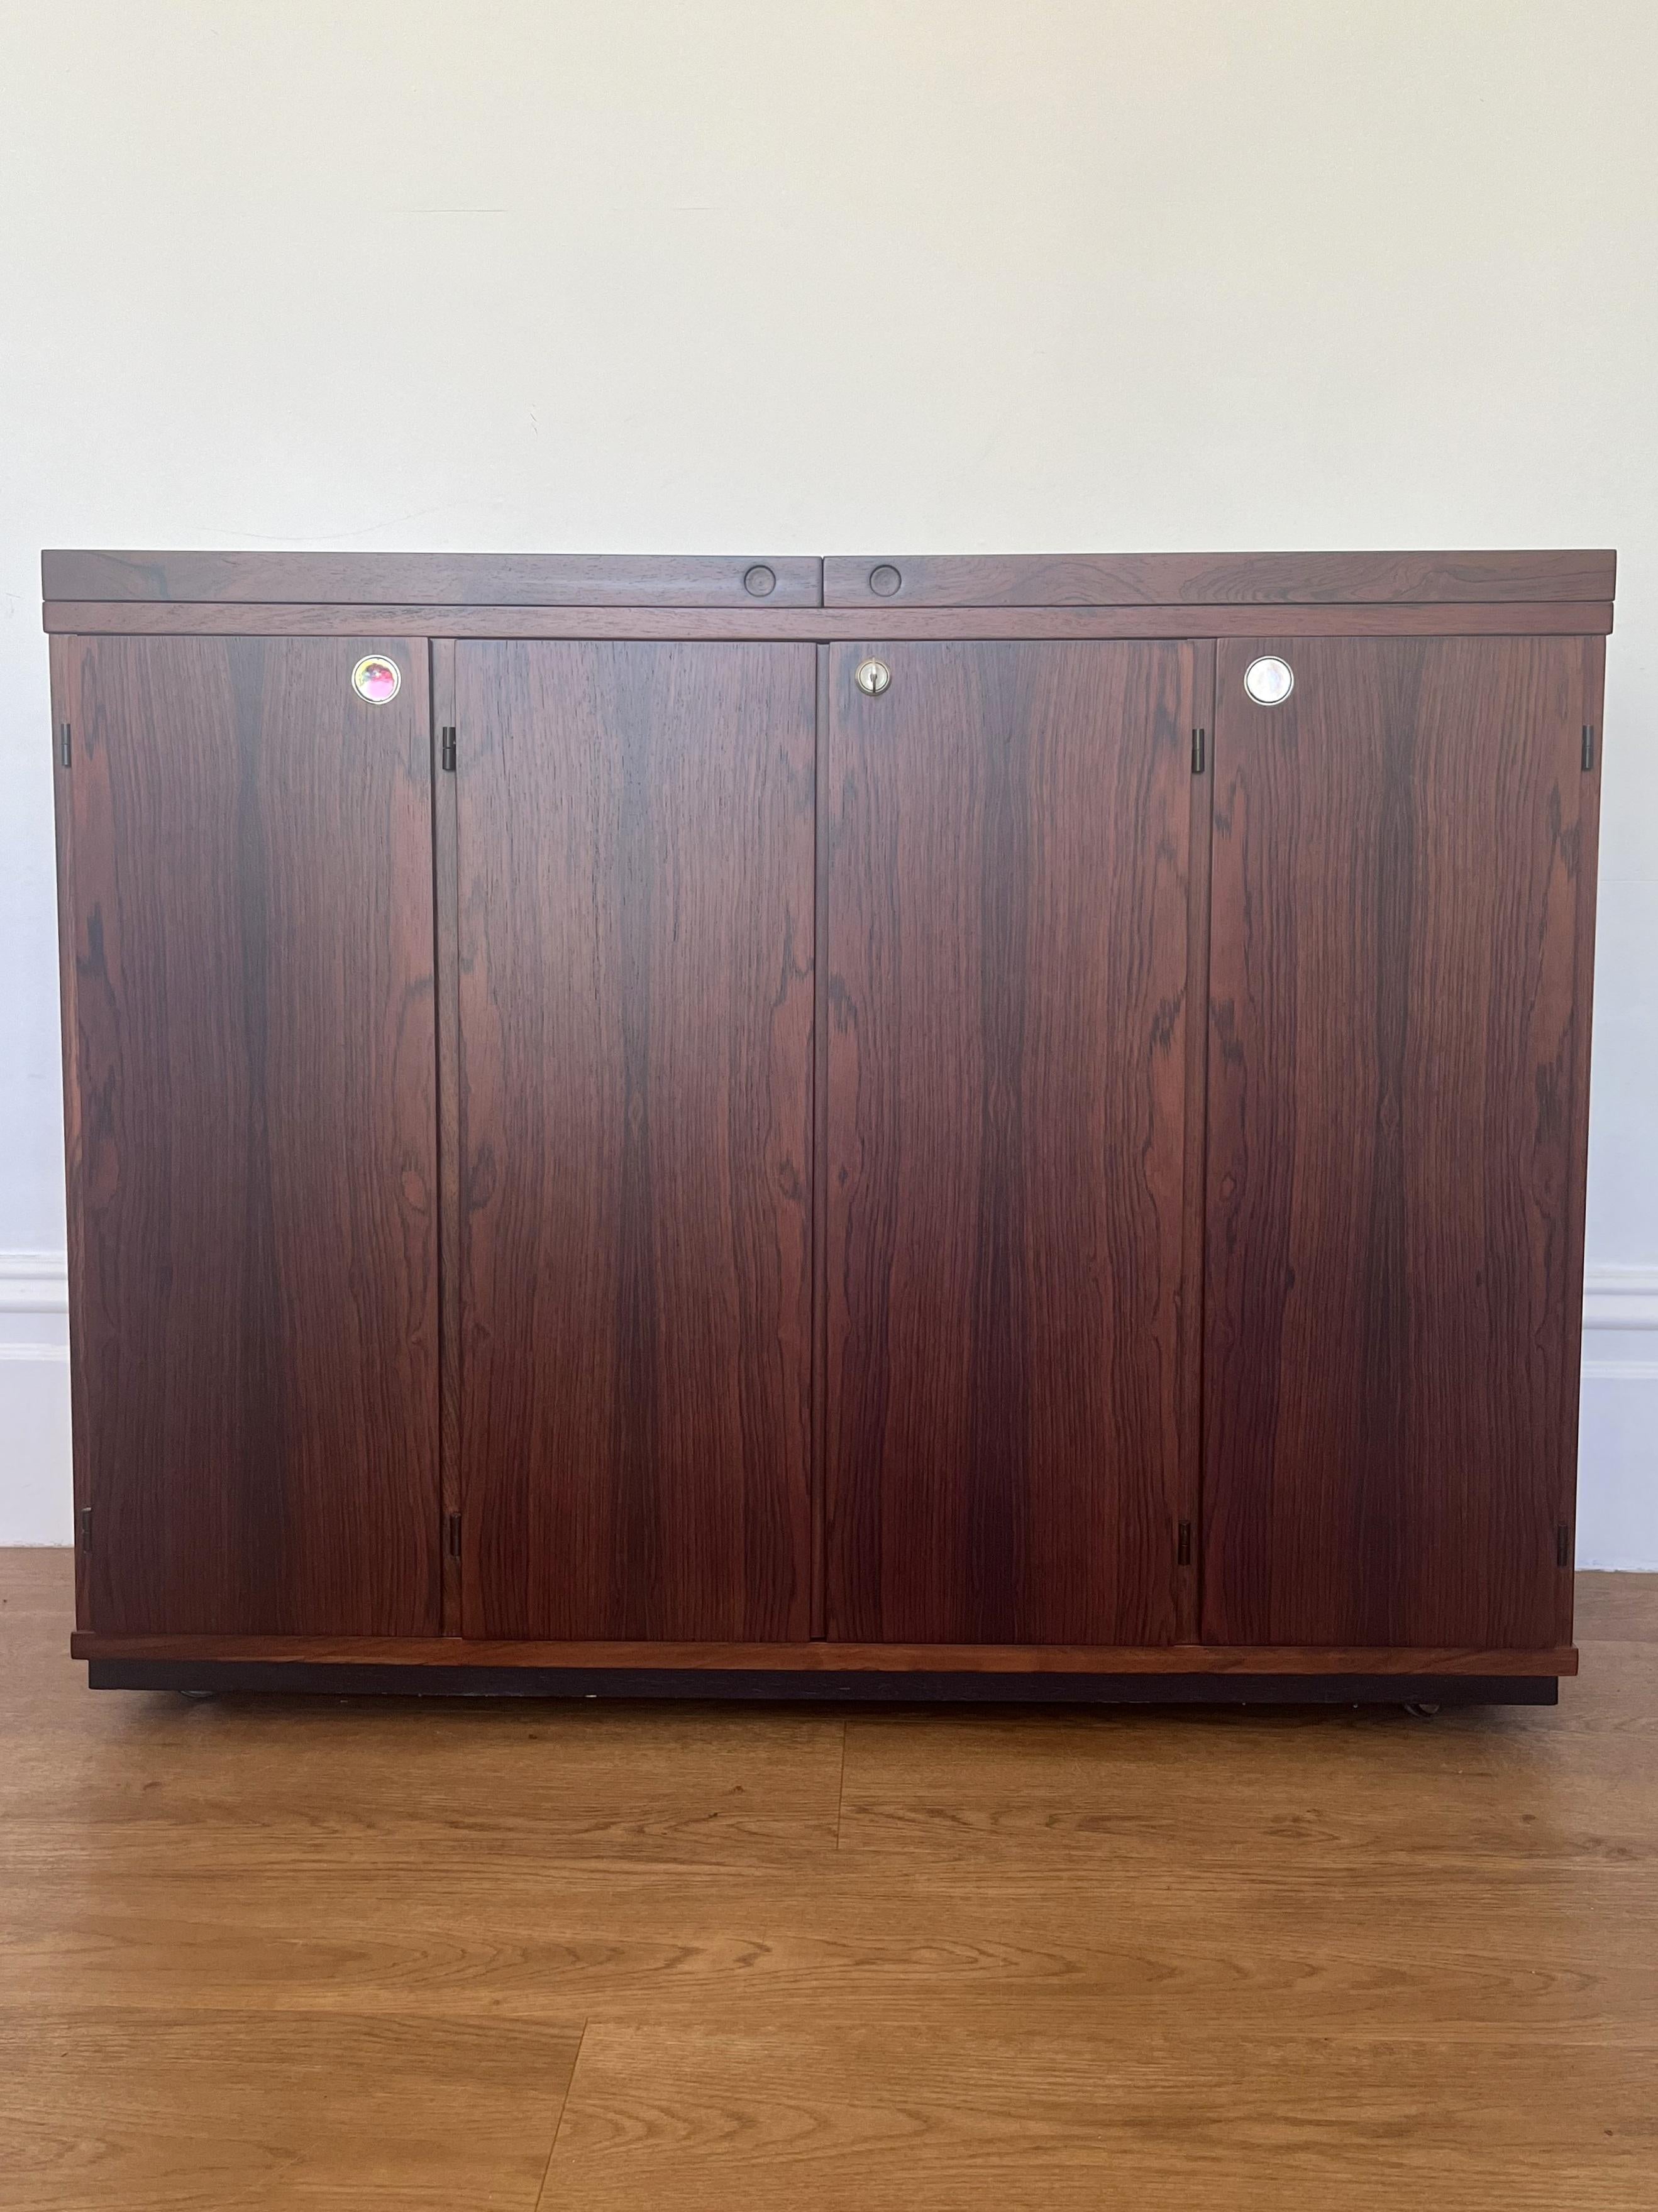 Dyrlund Rosewood drinks cabinet on castors.

The cabinet has an extending pull out top with black formica bar area.  2 single and 1 lockable central double door.  The interior has ample storage space which includes a total of 4 drawers and slide out